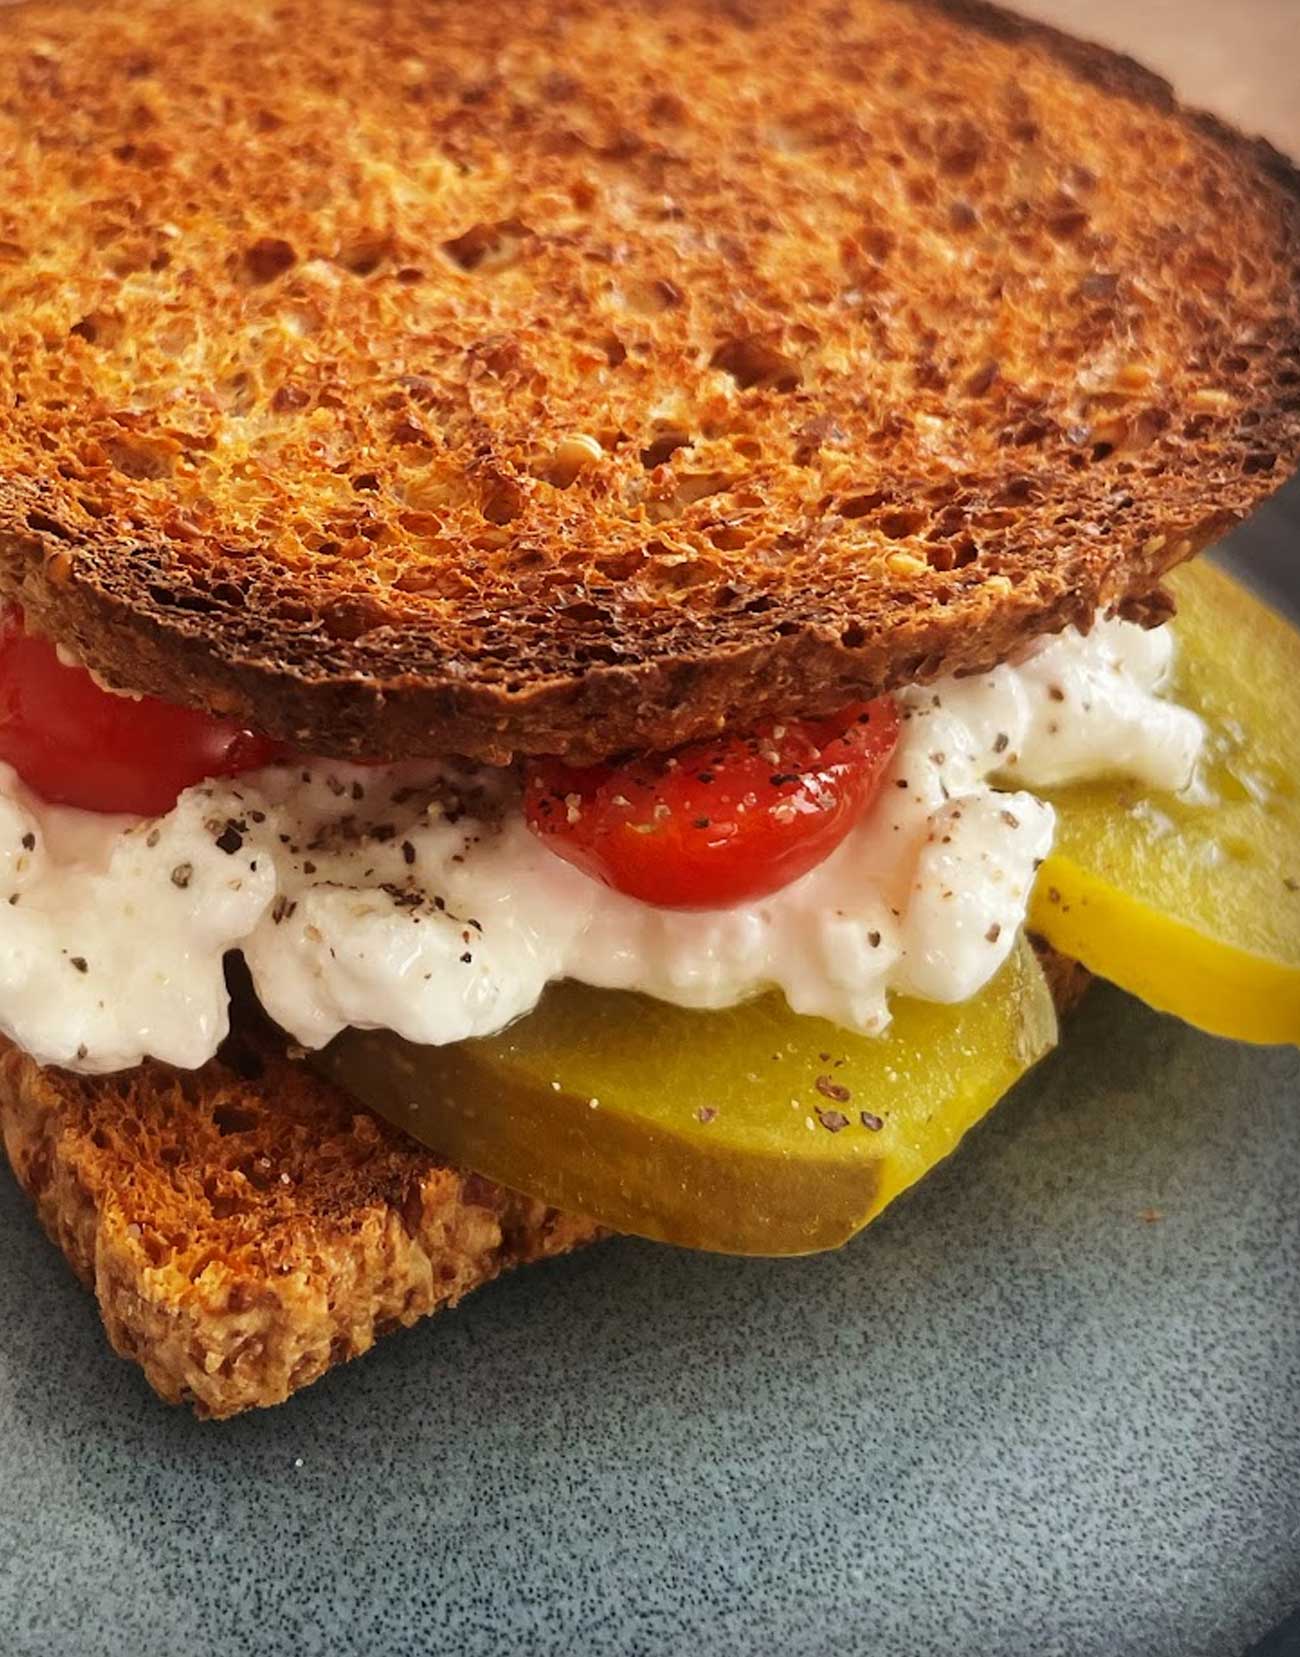 Wholesome Cottage Cheese Sandwich for a Satisfying Bite